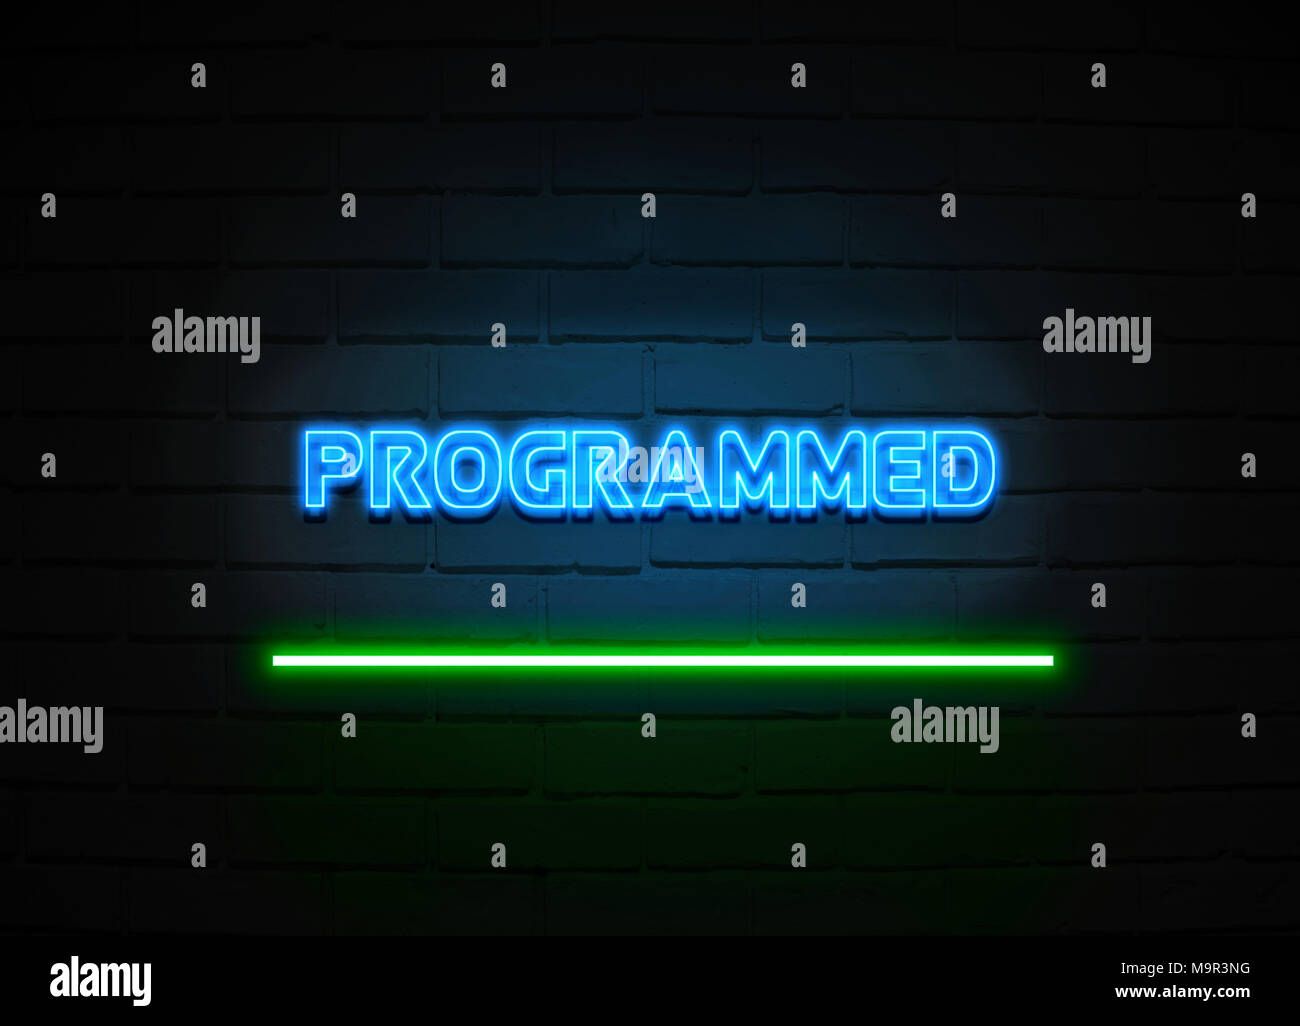 Programmed neon sign - Glowing Neon Sign on brickwall wall - 3D rendered royalty free stock illustration. Stock Photo